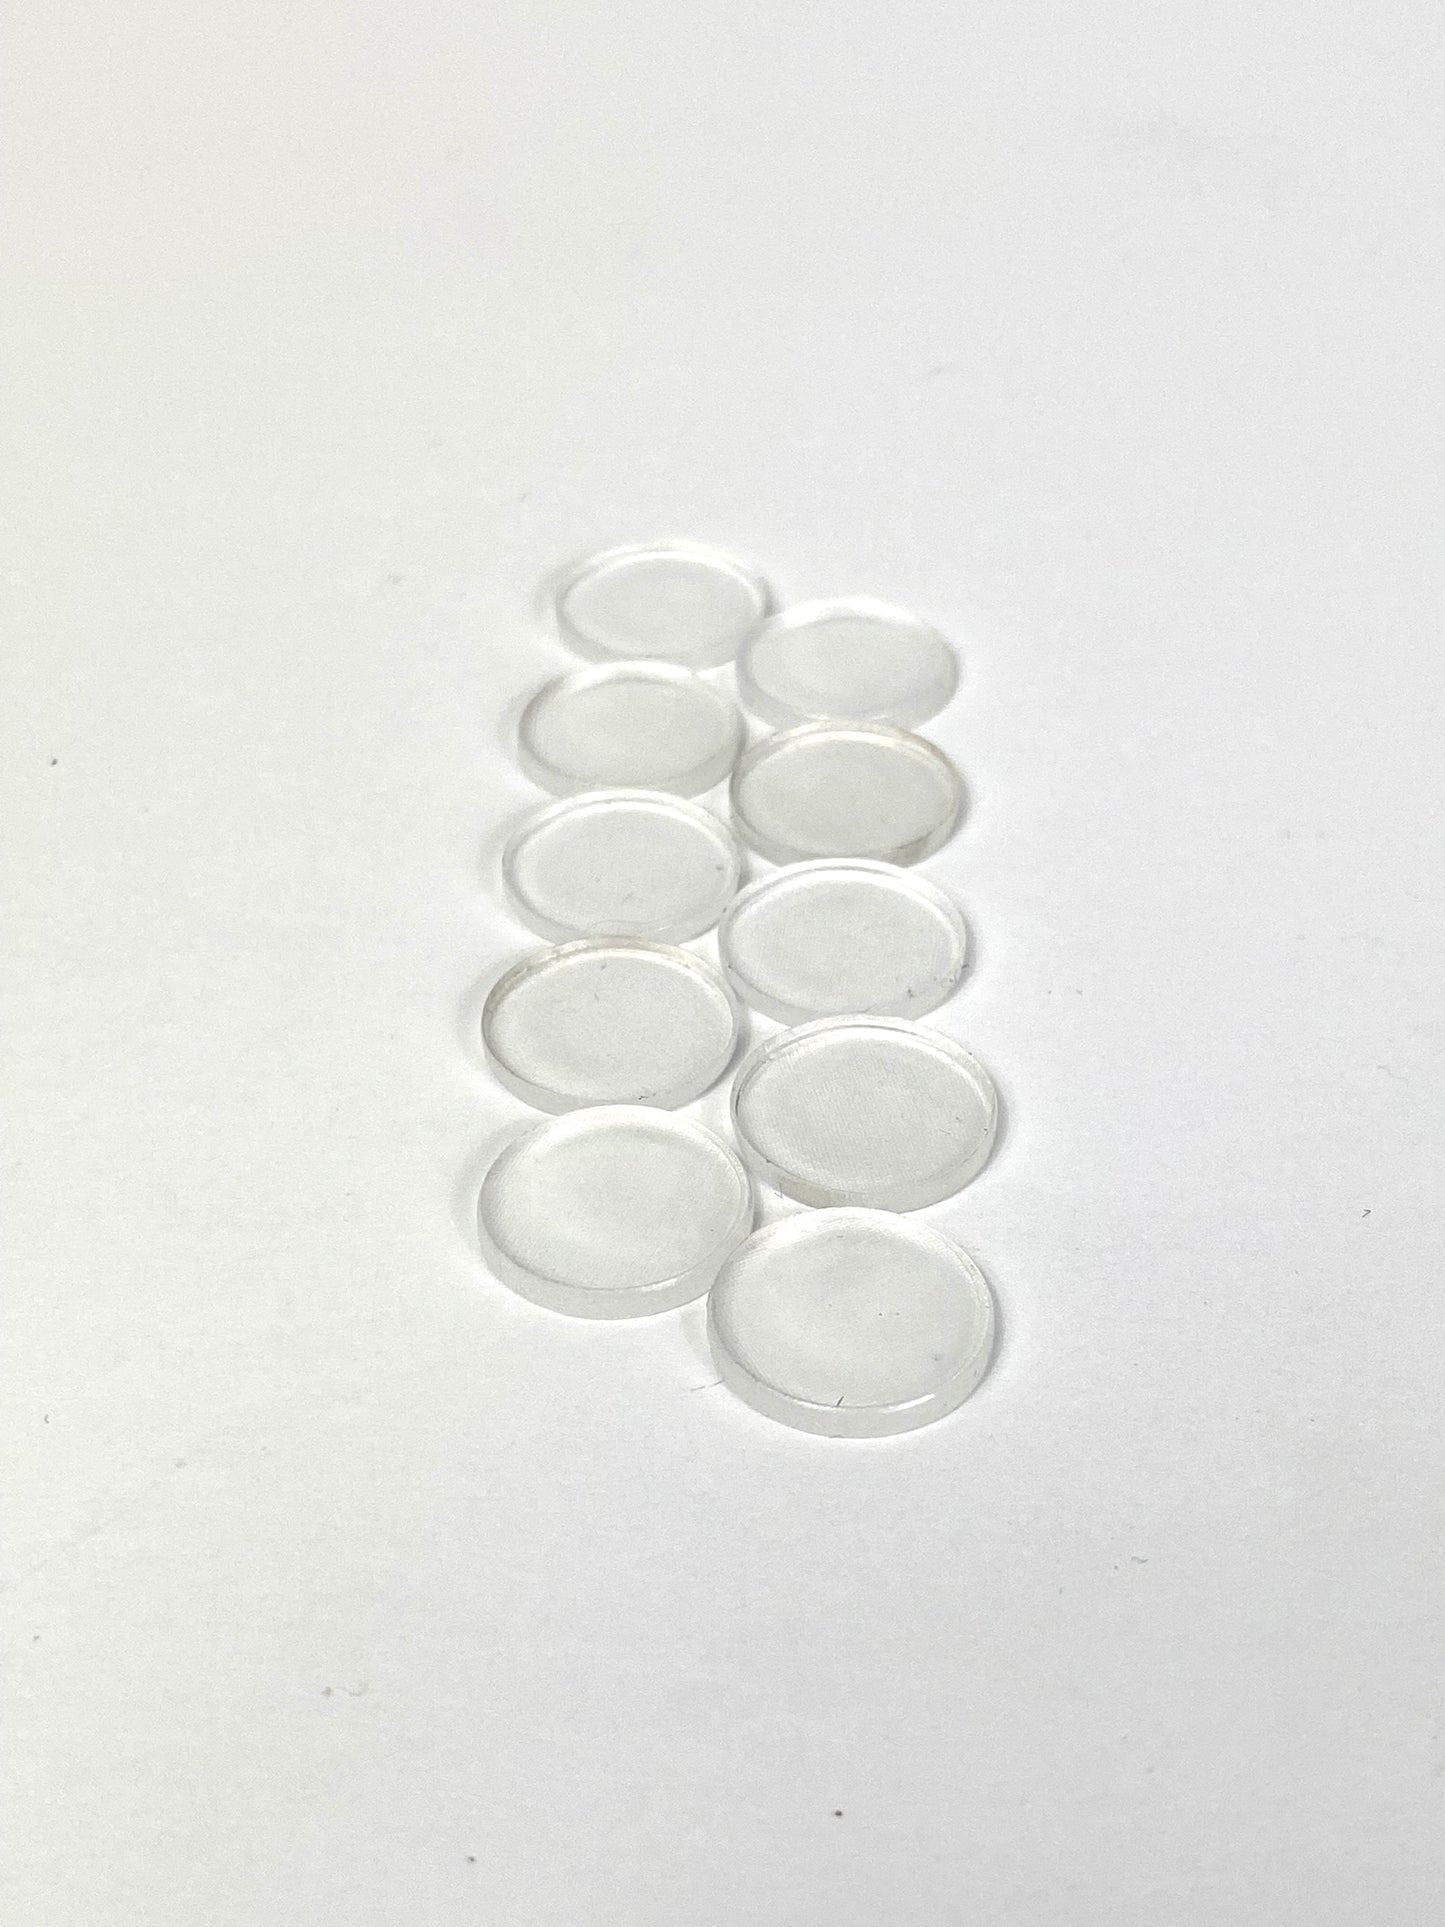 Impact Modified Acrylic Tip Pads 2mm x 15.875mm  (10 pack)